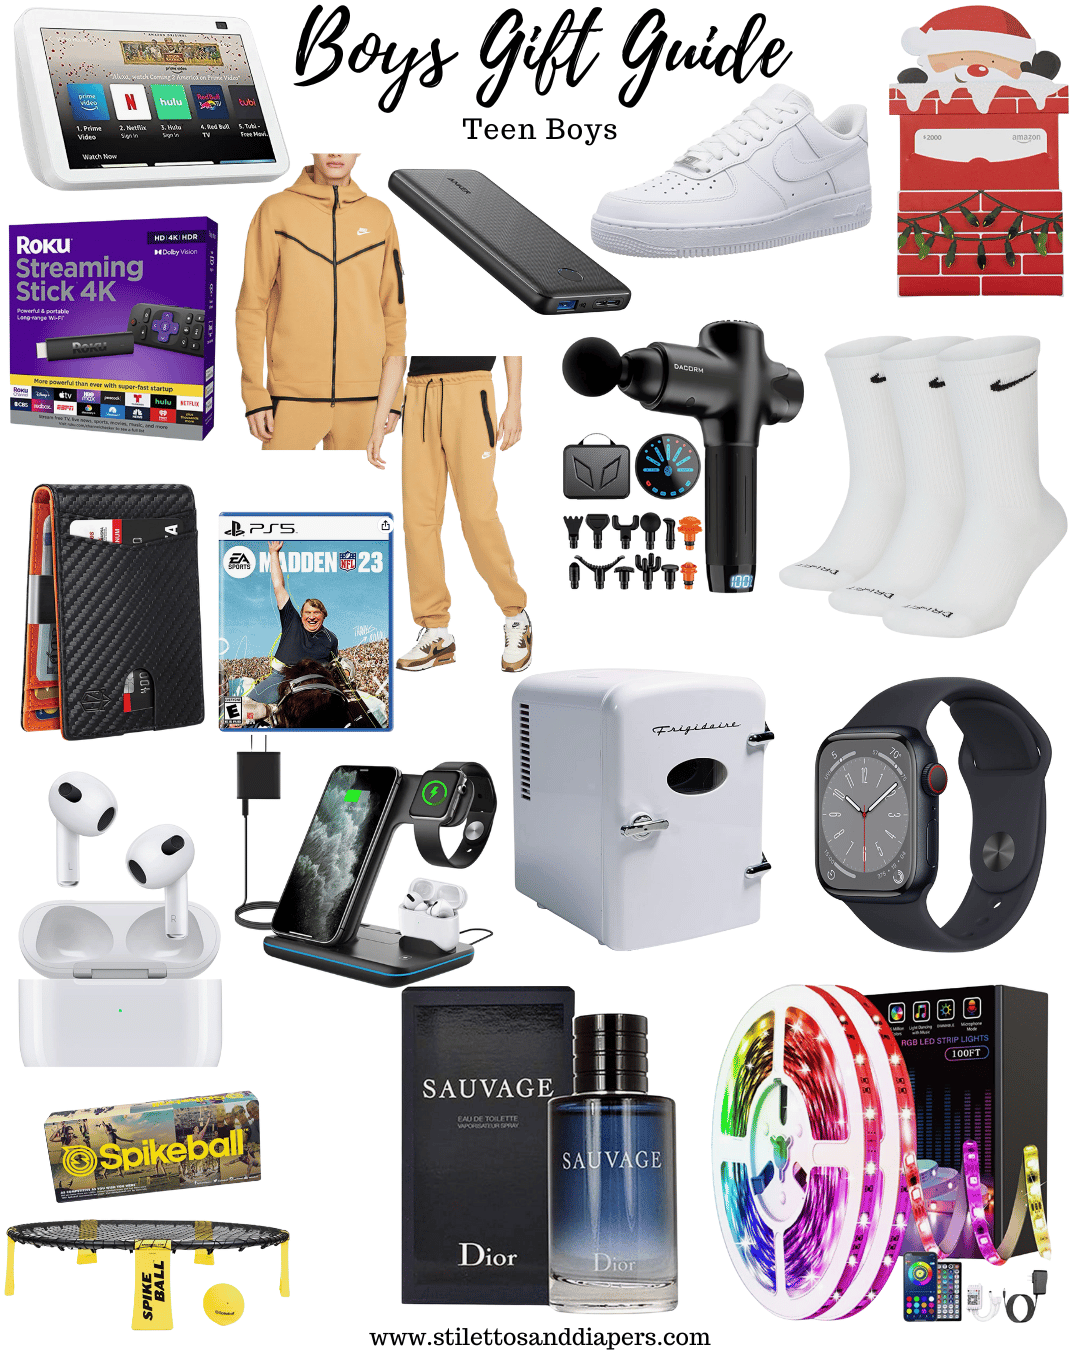 Complete Boys Gift Guide 2022, teen boys gift ideas, Stilettos and Diapers